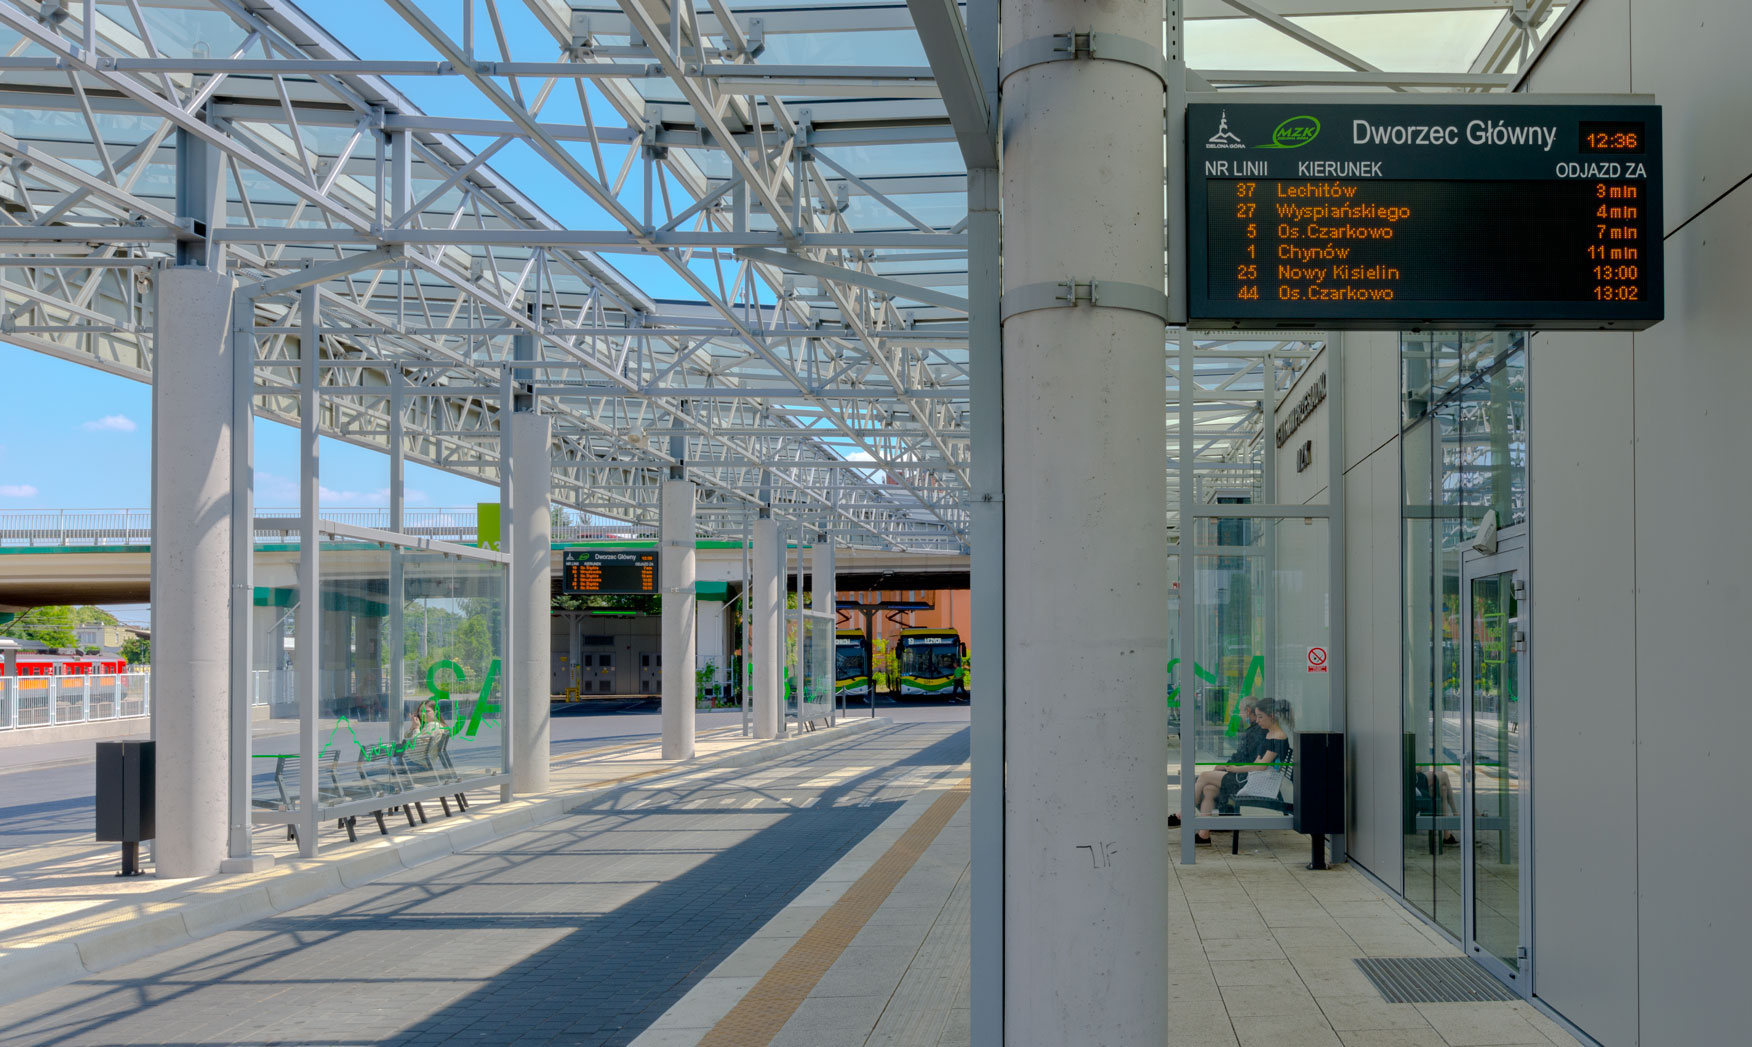 Main and stop amber LED passenger information boards manufactured by DYSTEN in Zielona Góra